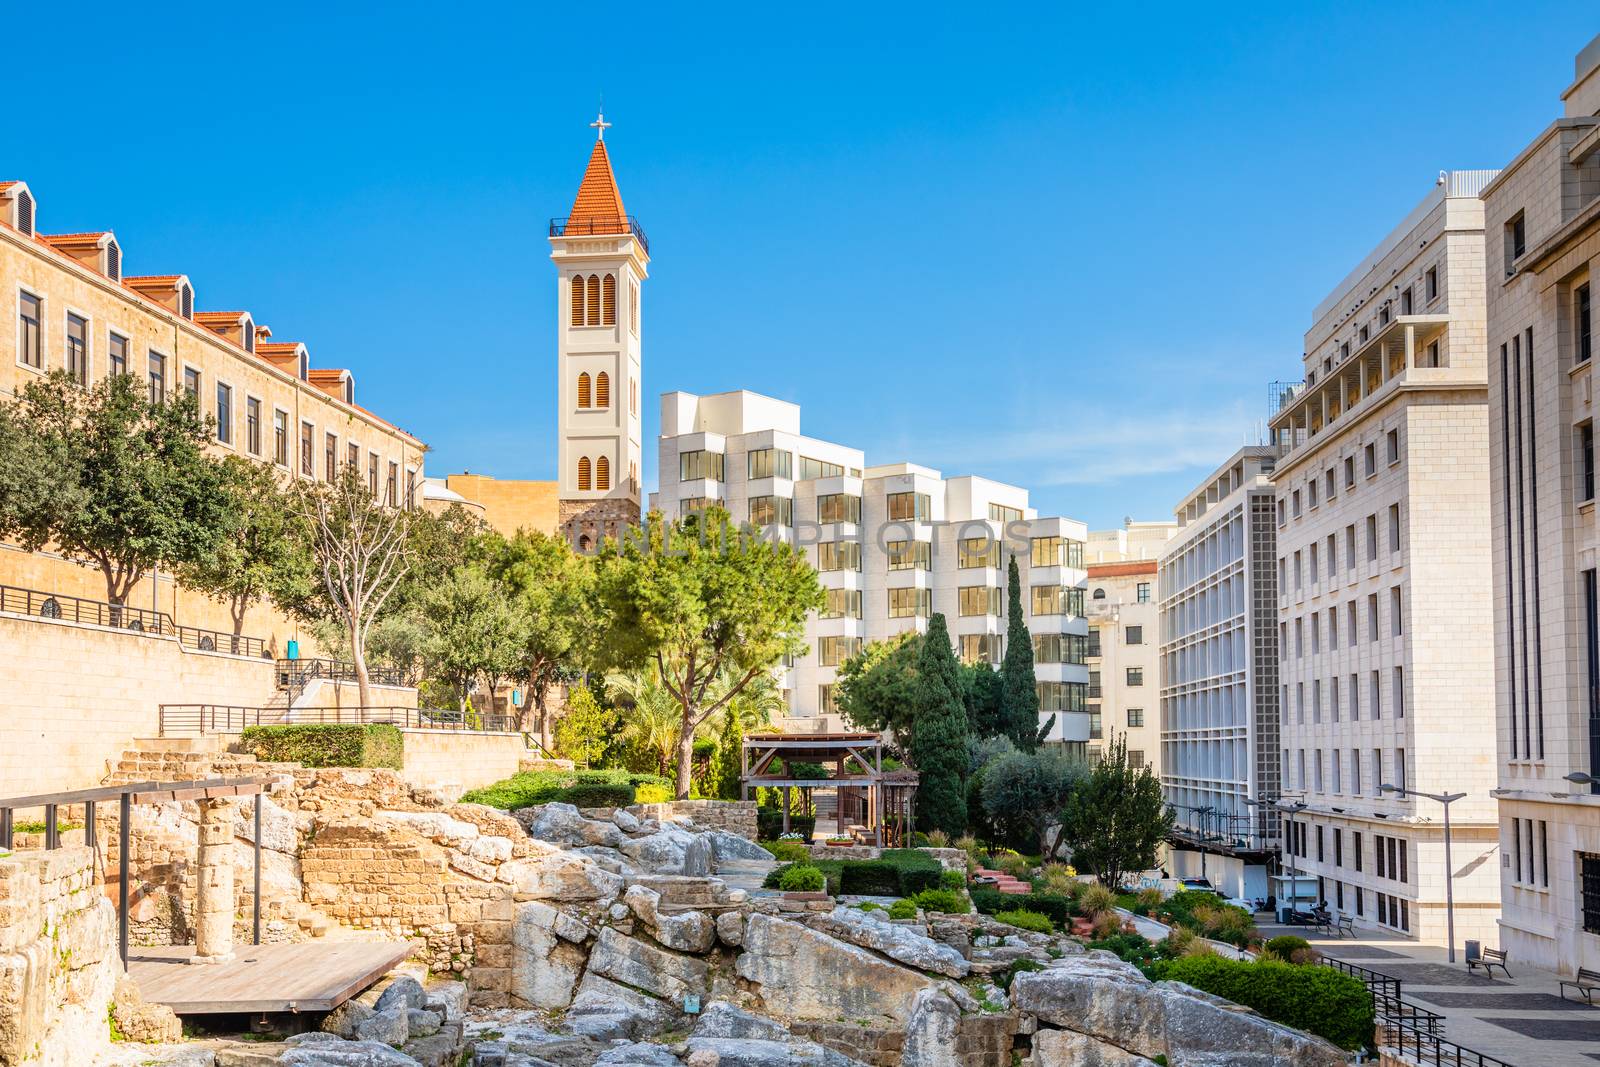 Roman baths ancient ruins site, modern buidings and Saint Louis Cathedral of the Capuchin Fathers Latin Catholic church in the downtown of Beirut, Lebanon